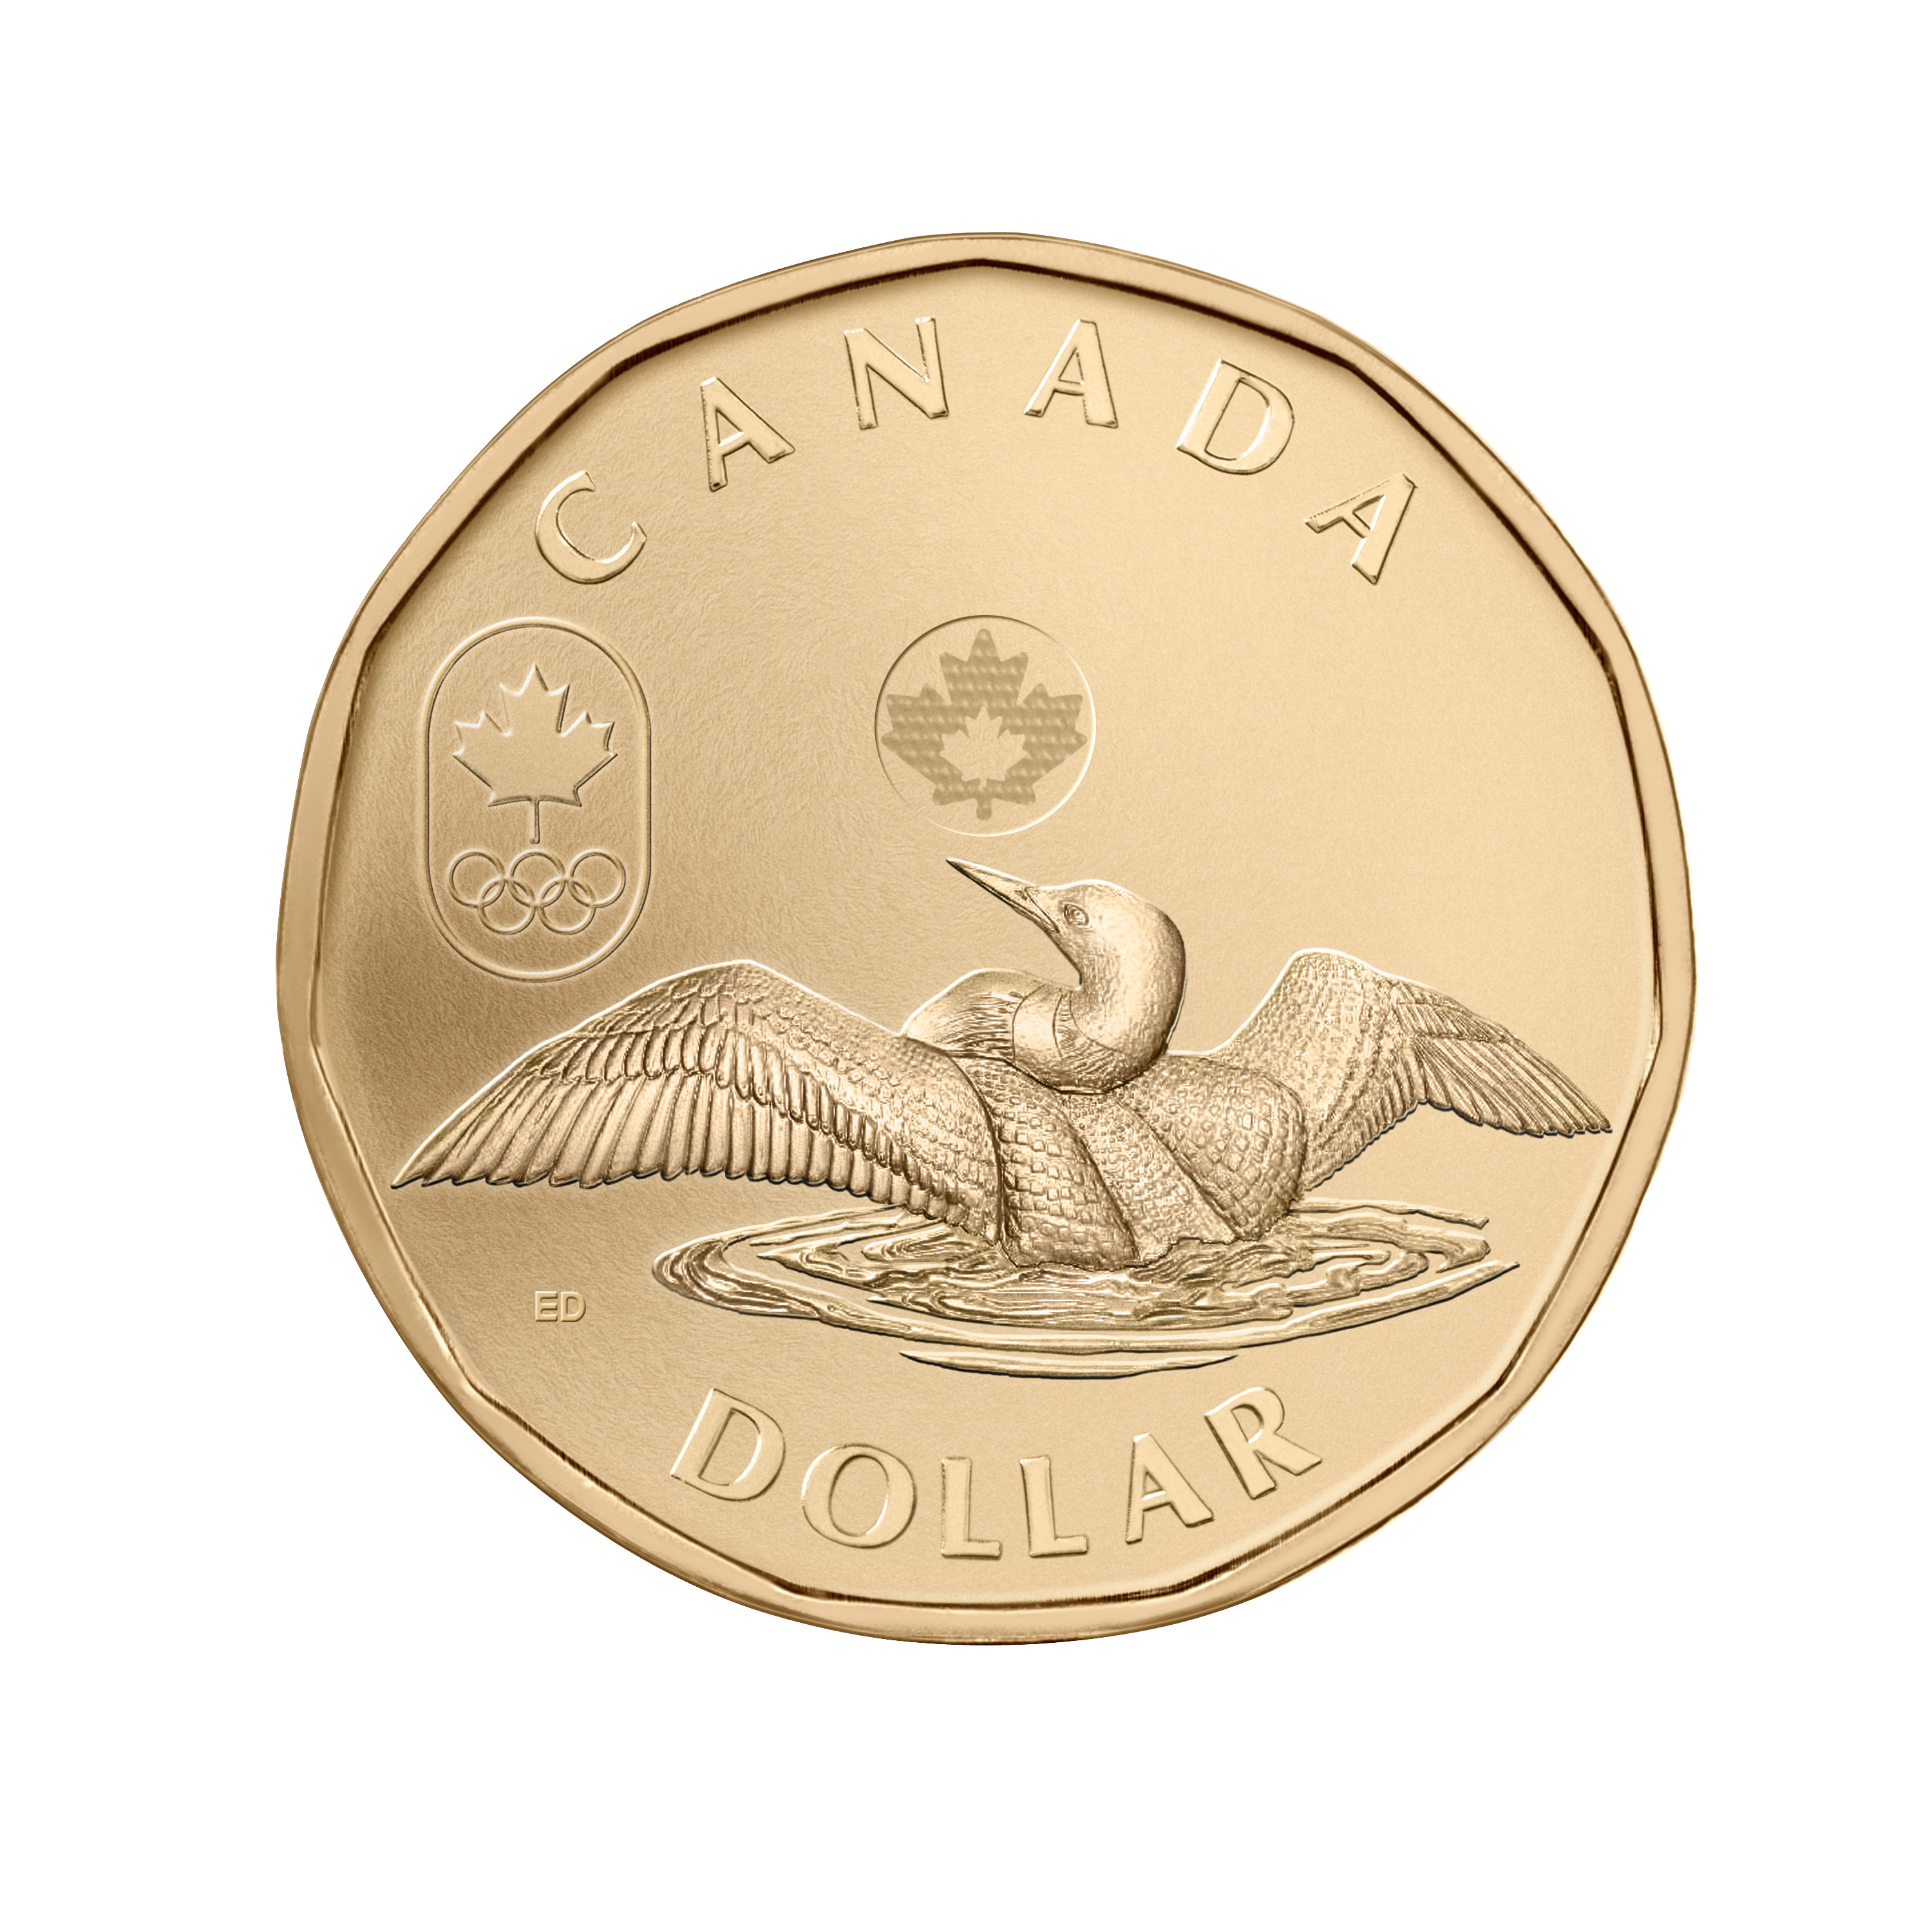 CANADA $1 2014 Lucky Loonie Uncirculated Sealed